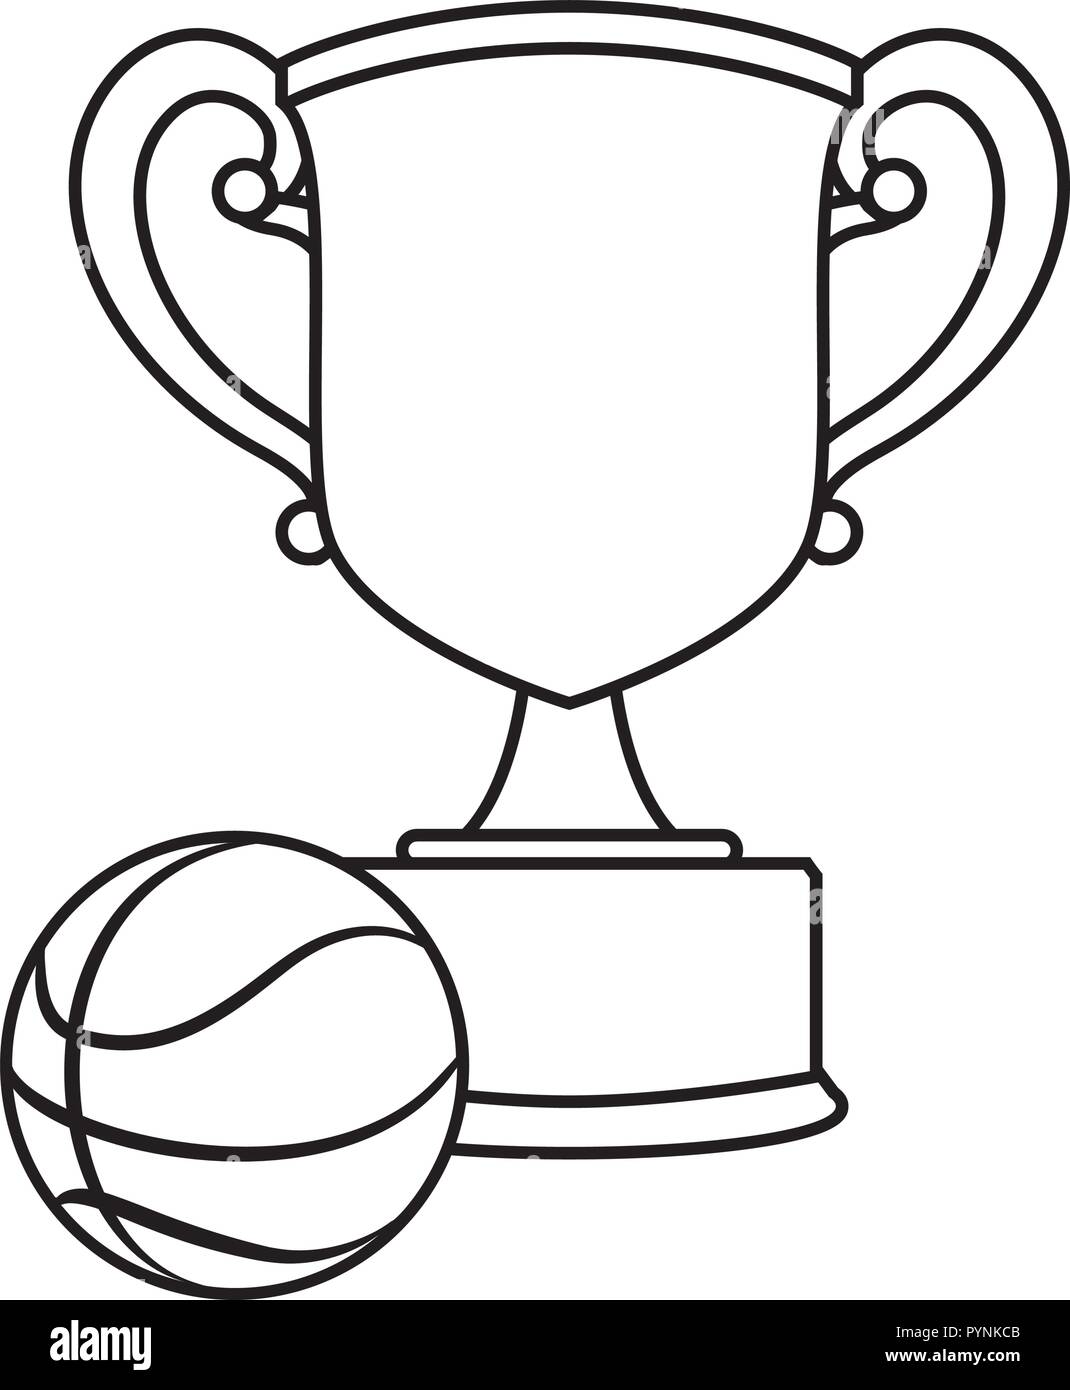 Basketball Trophy Cup Vector Illustration Graphic Design Royalty Free SVG,  Cliparts, Vectors, and Stock Illustration. Image 96946802.